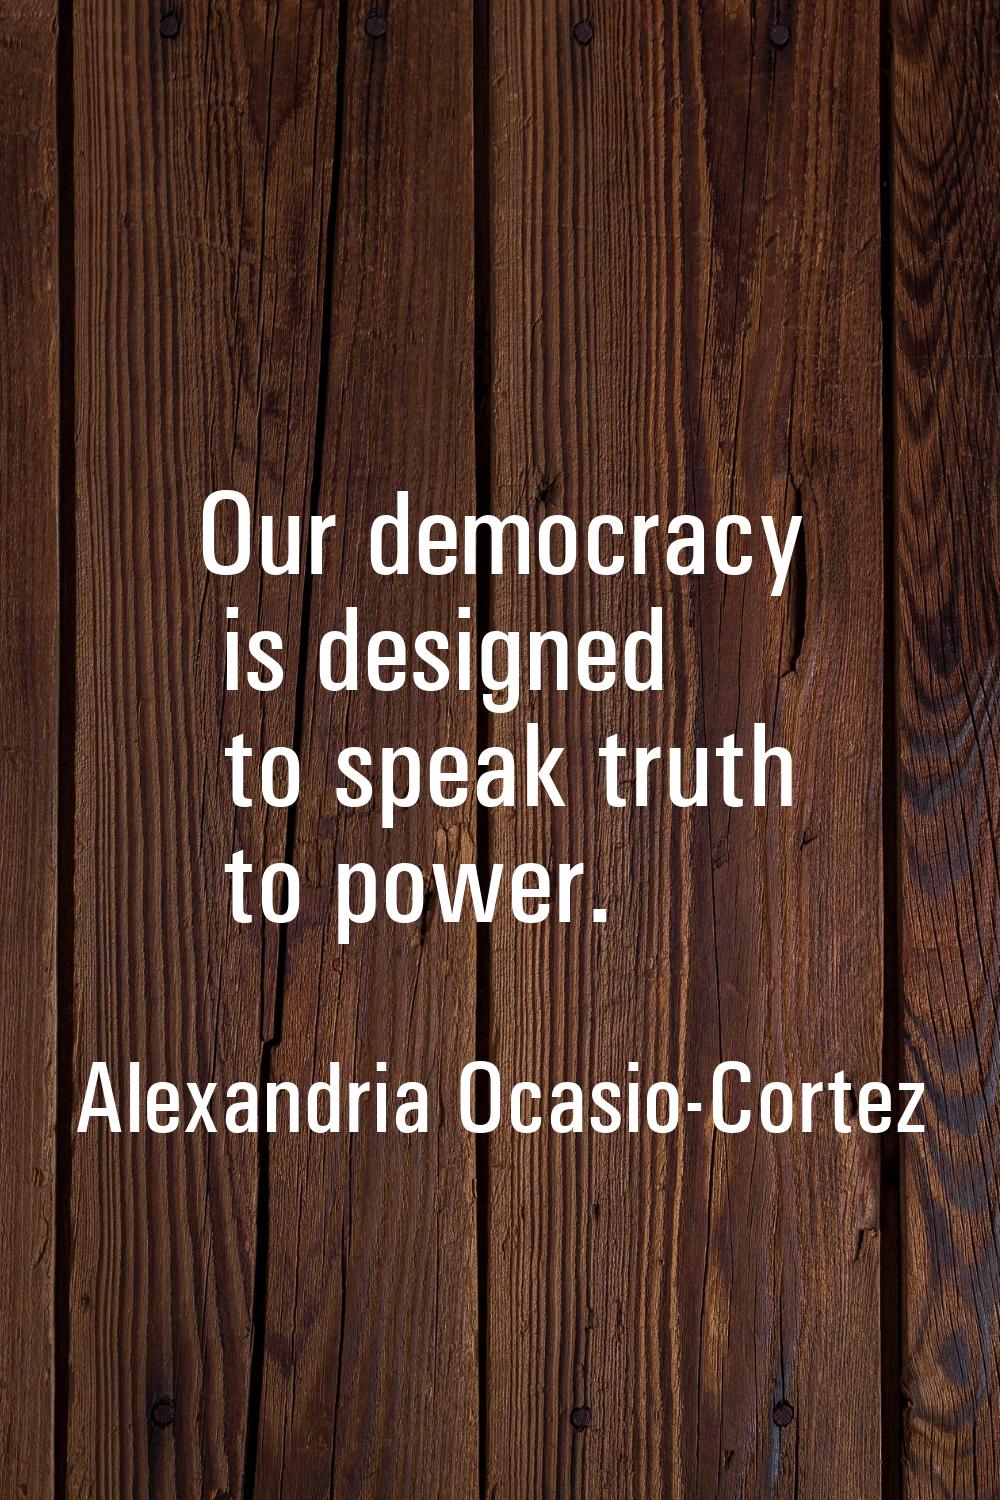 Our democracy is designed to speak truth to power.